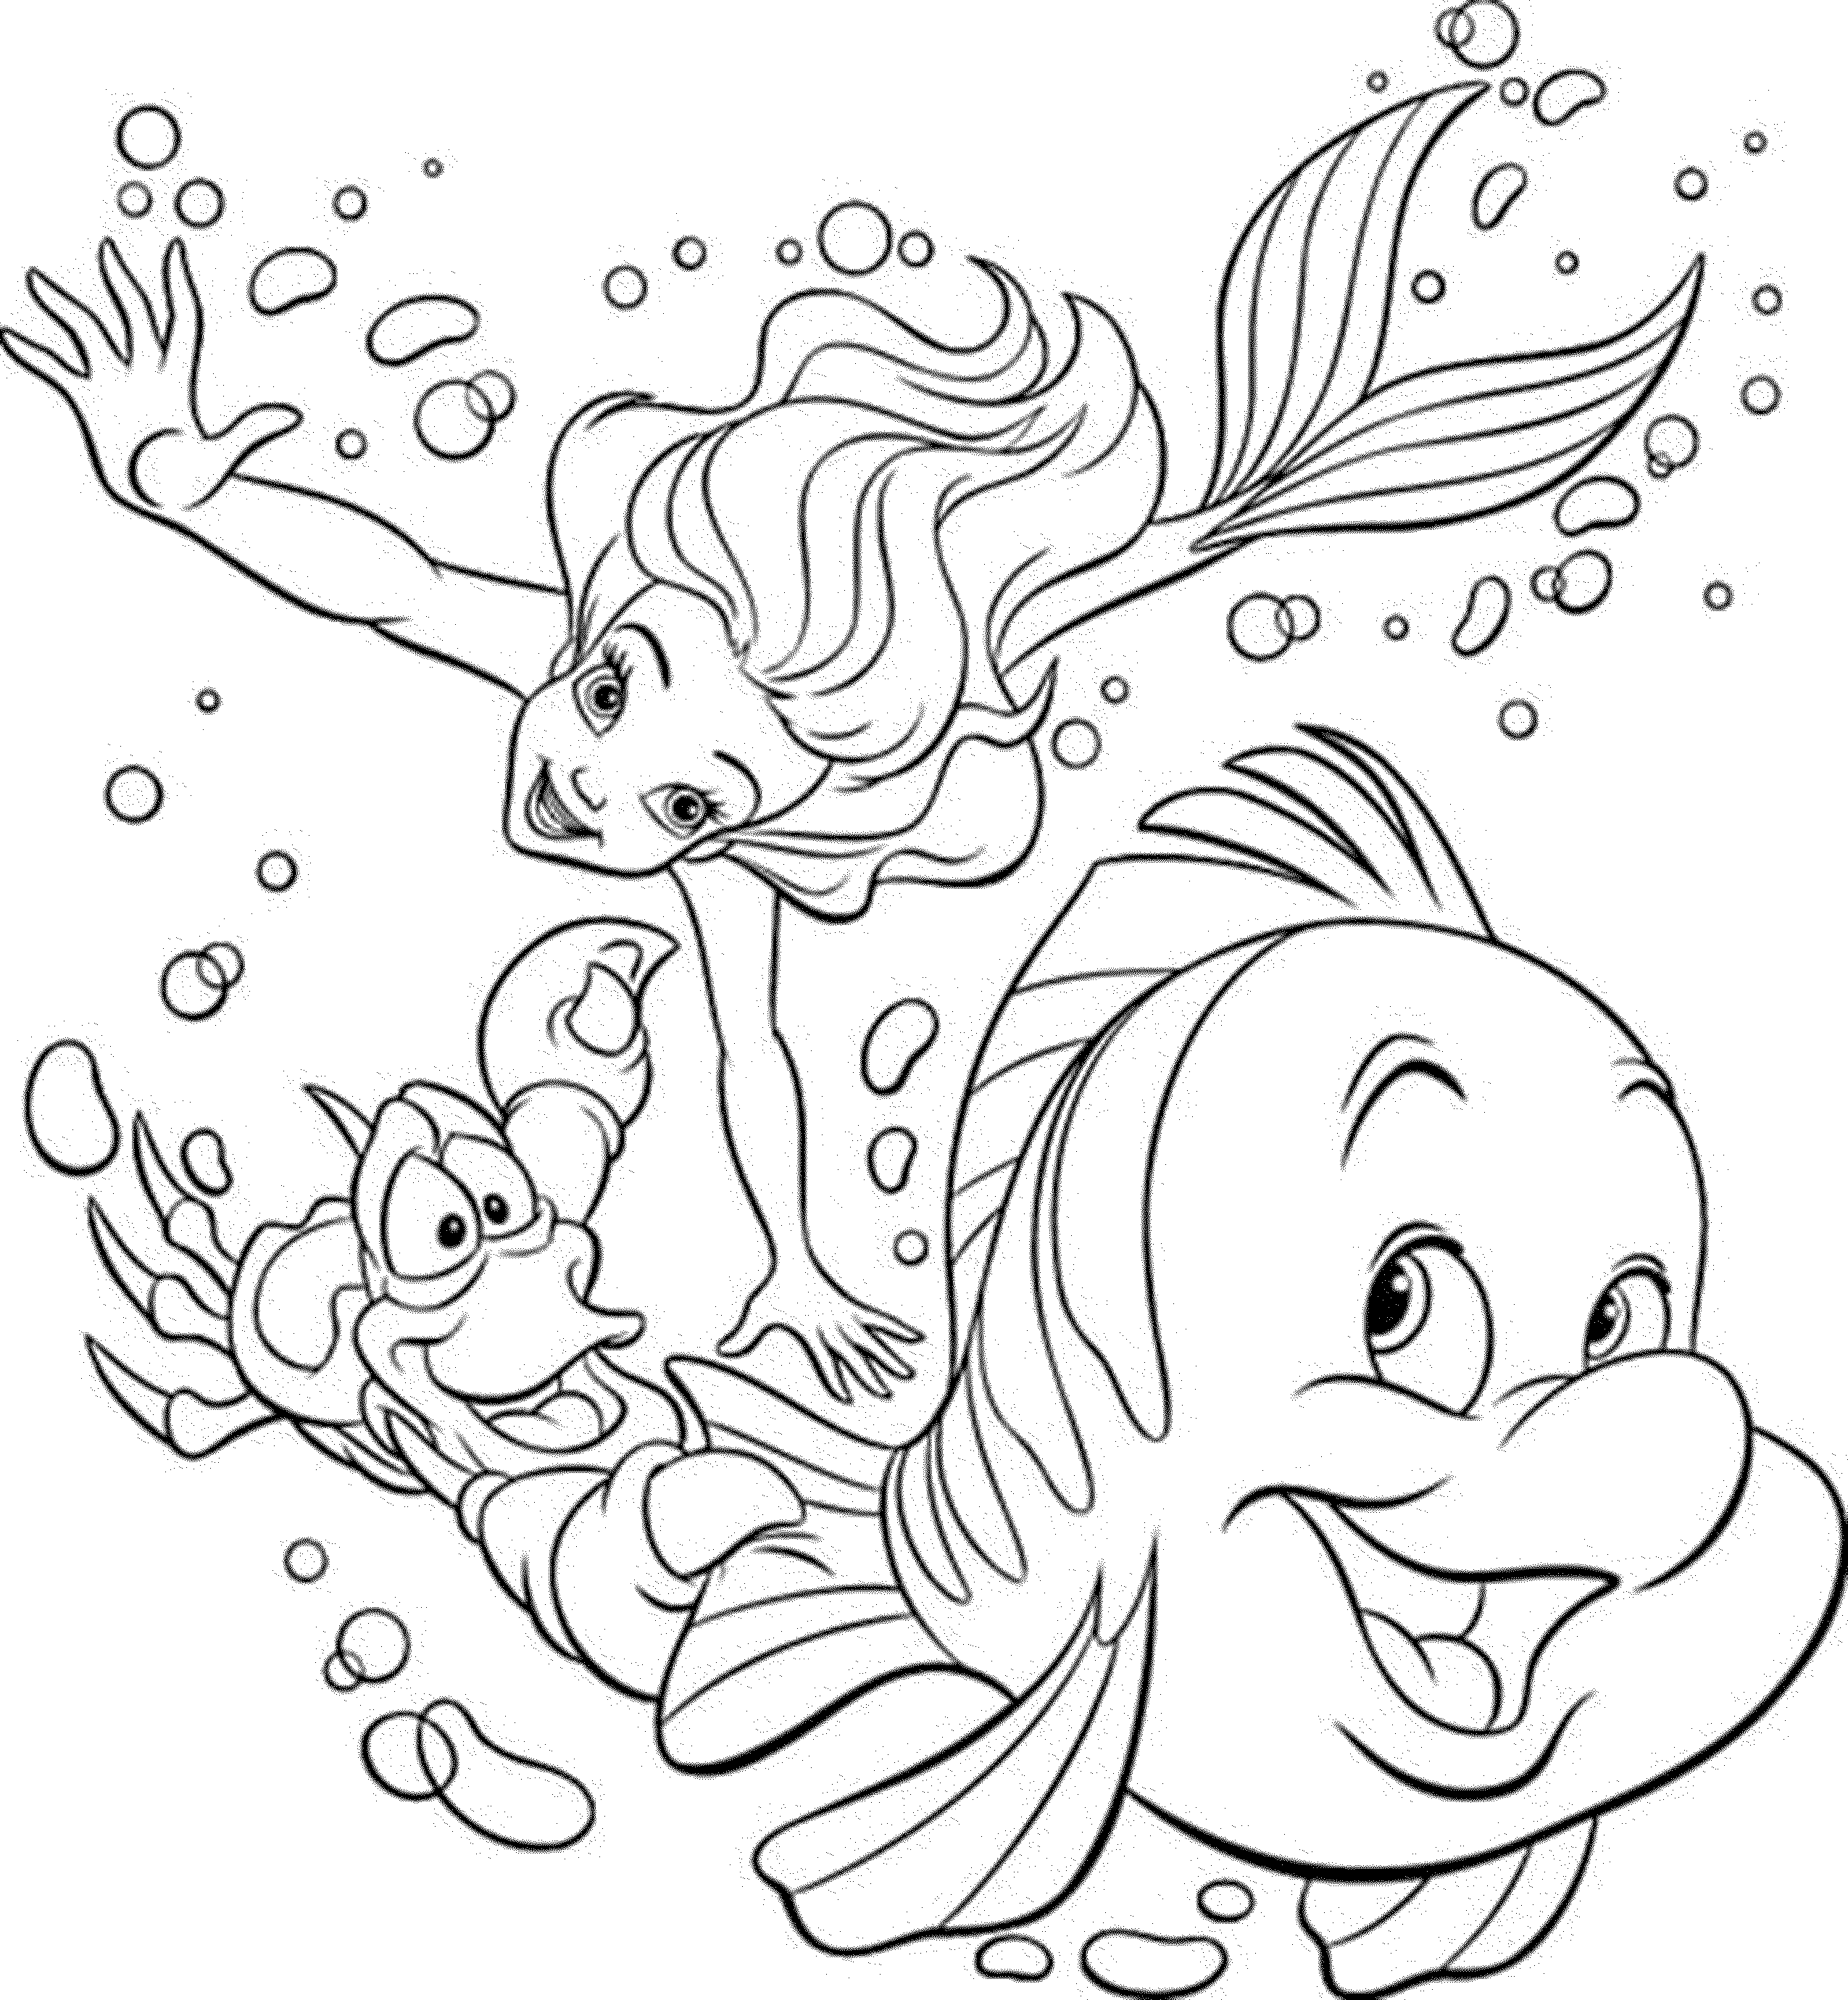 funny-coloring-pages-for-adults | | BestAppsForKids.com